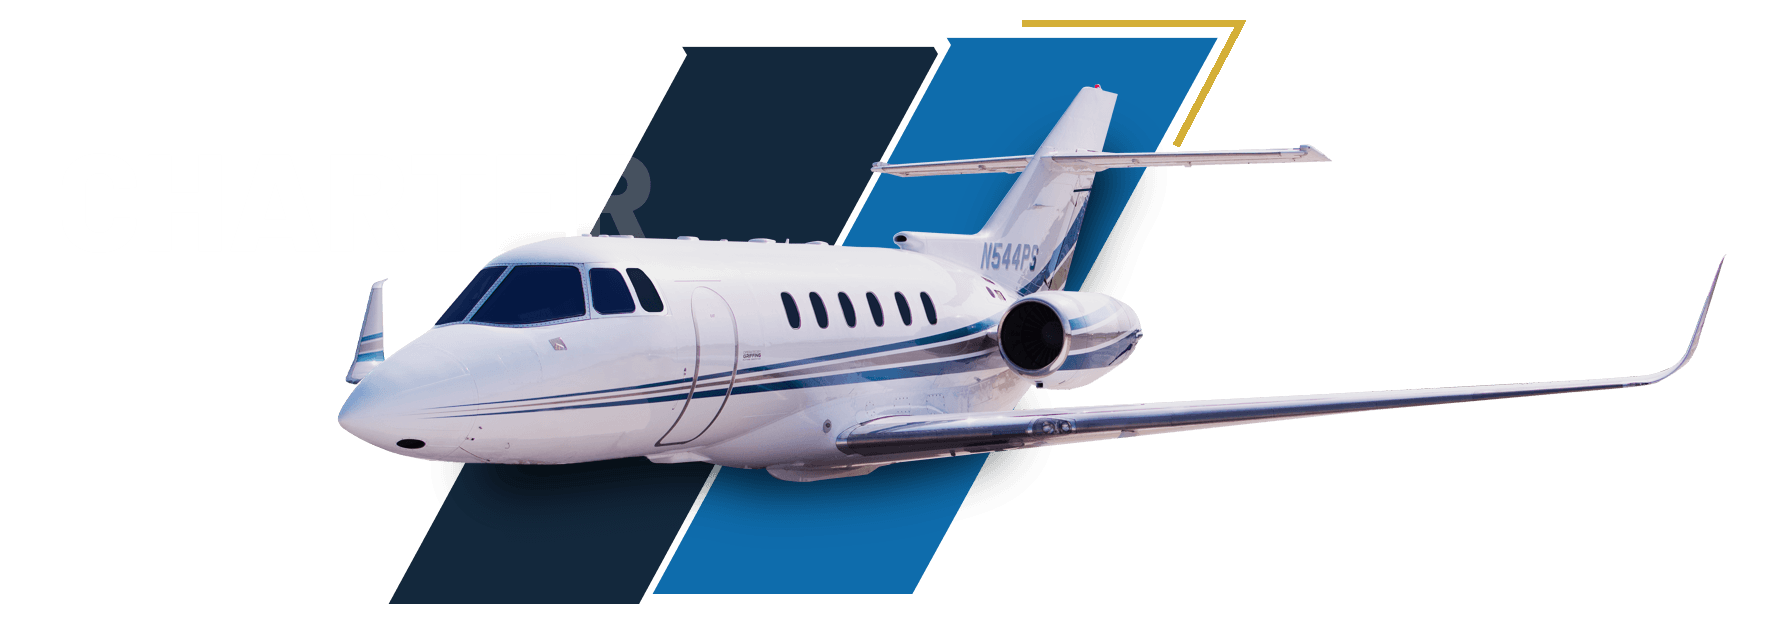 Worry-free private chartered jet & plane travel direct to over 4,000 destinations across the U.S. & Canada, on your schedule from Griffing Flying Service